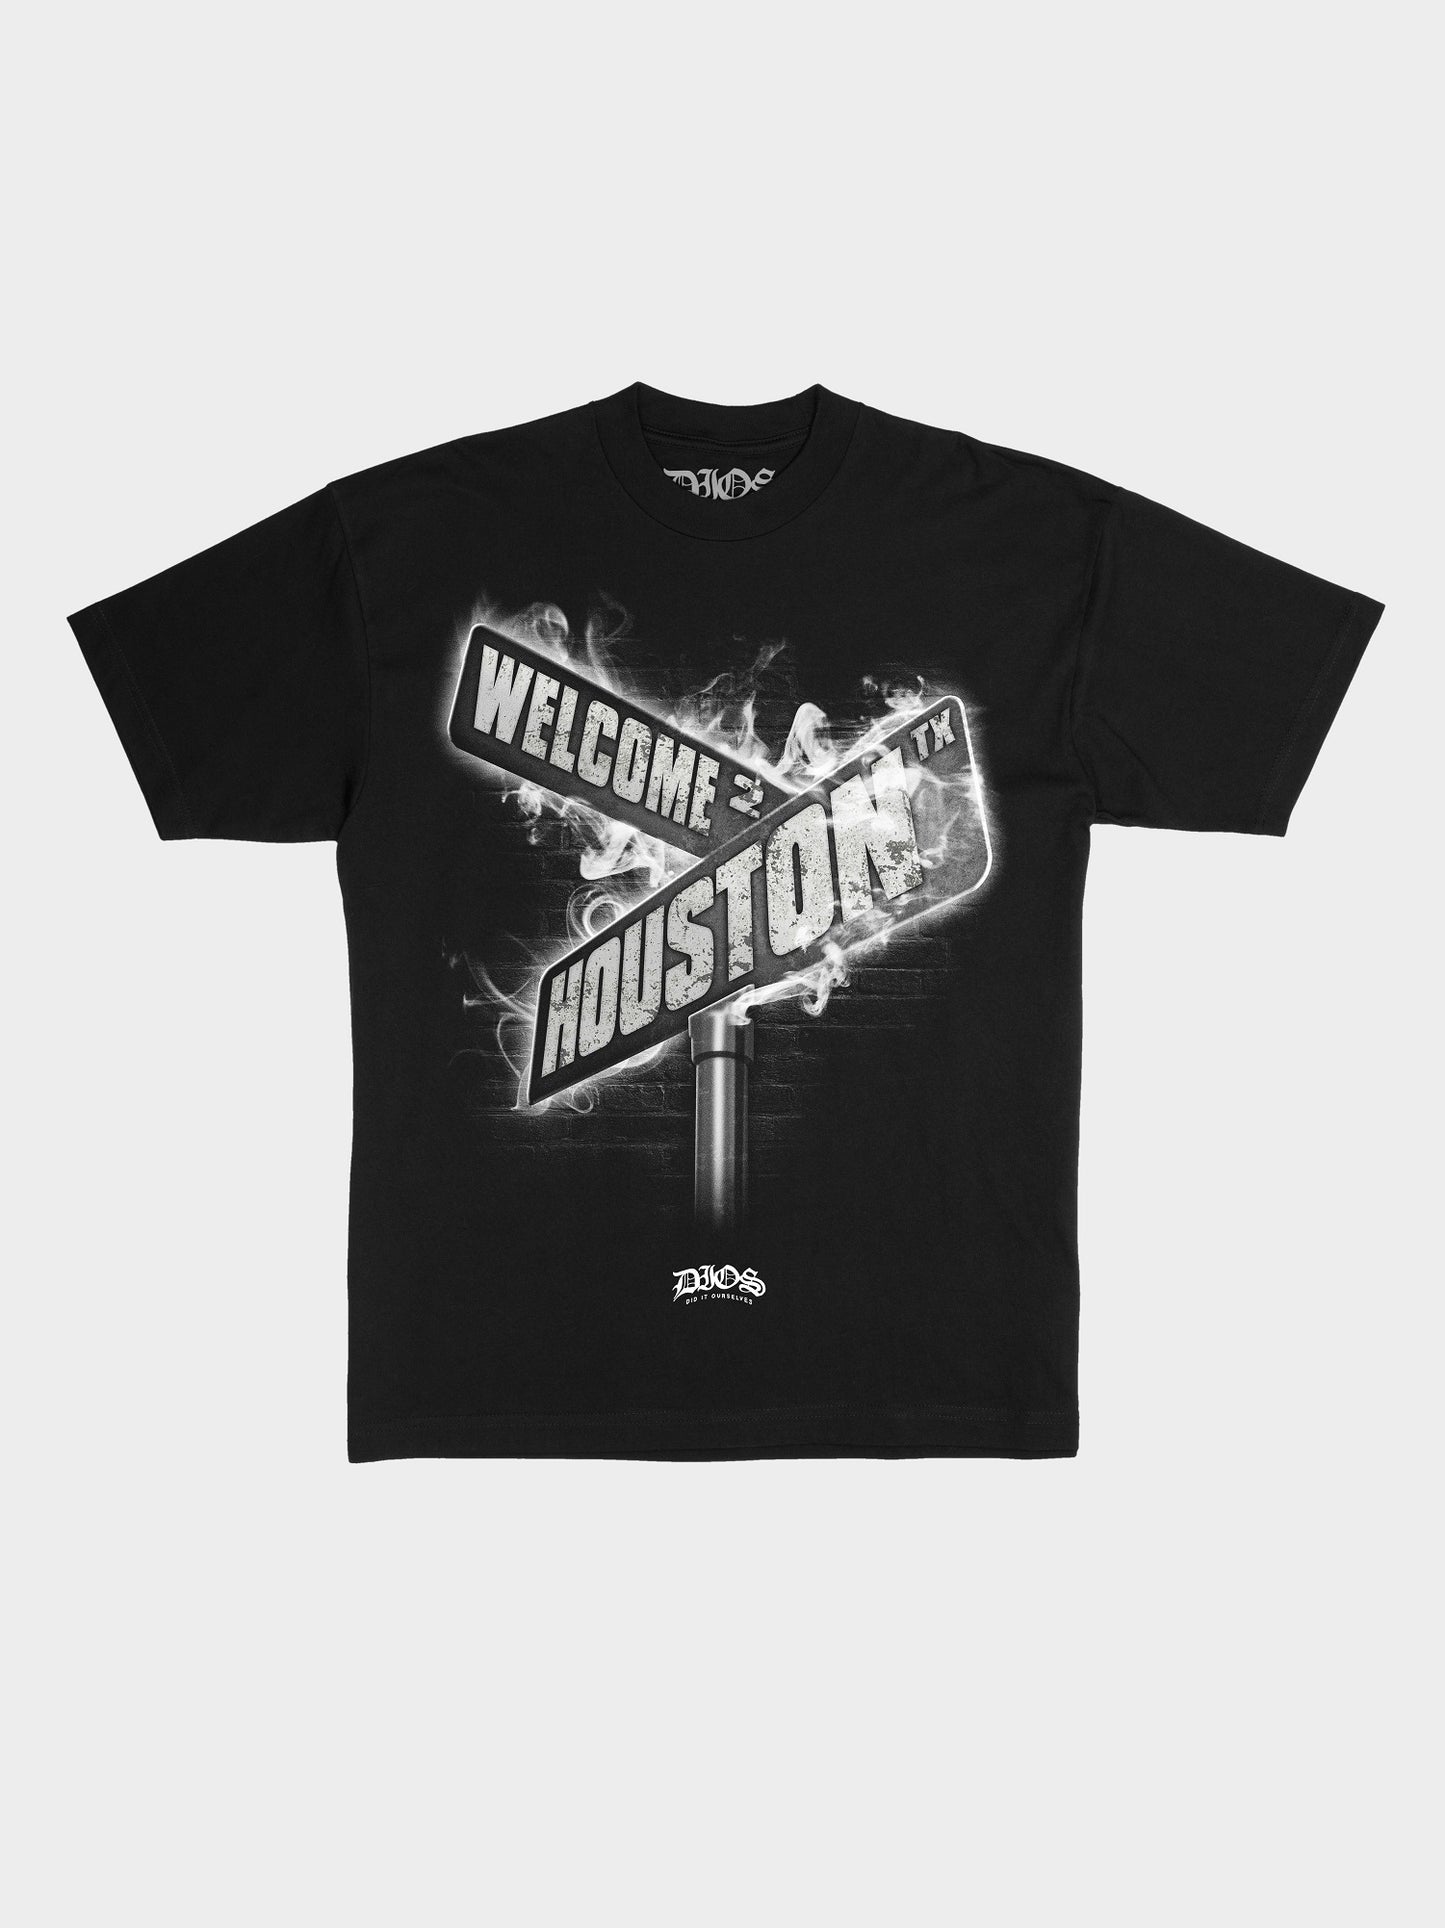 DIOS RECORDS - WELCOME 2 HOUSTON - BLK TEE (PRE-ORDER)